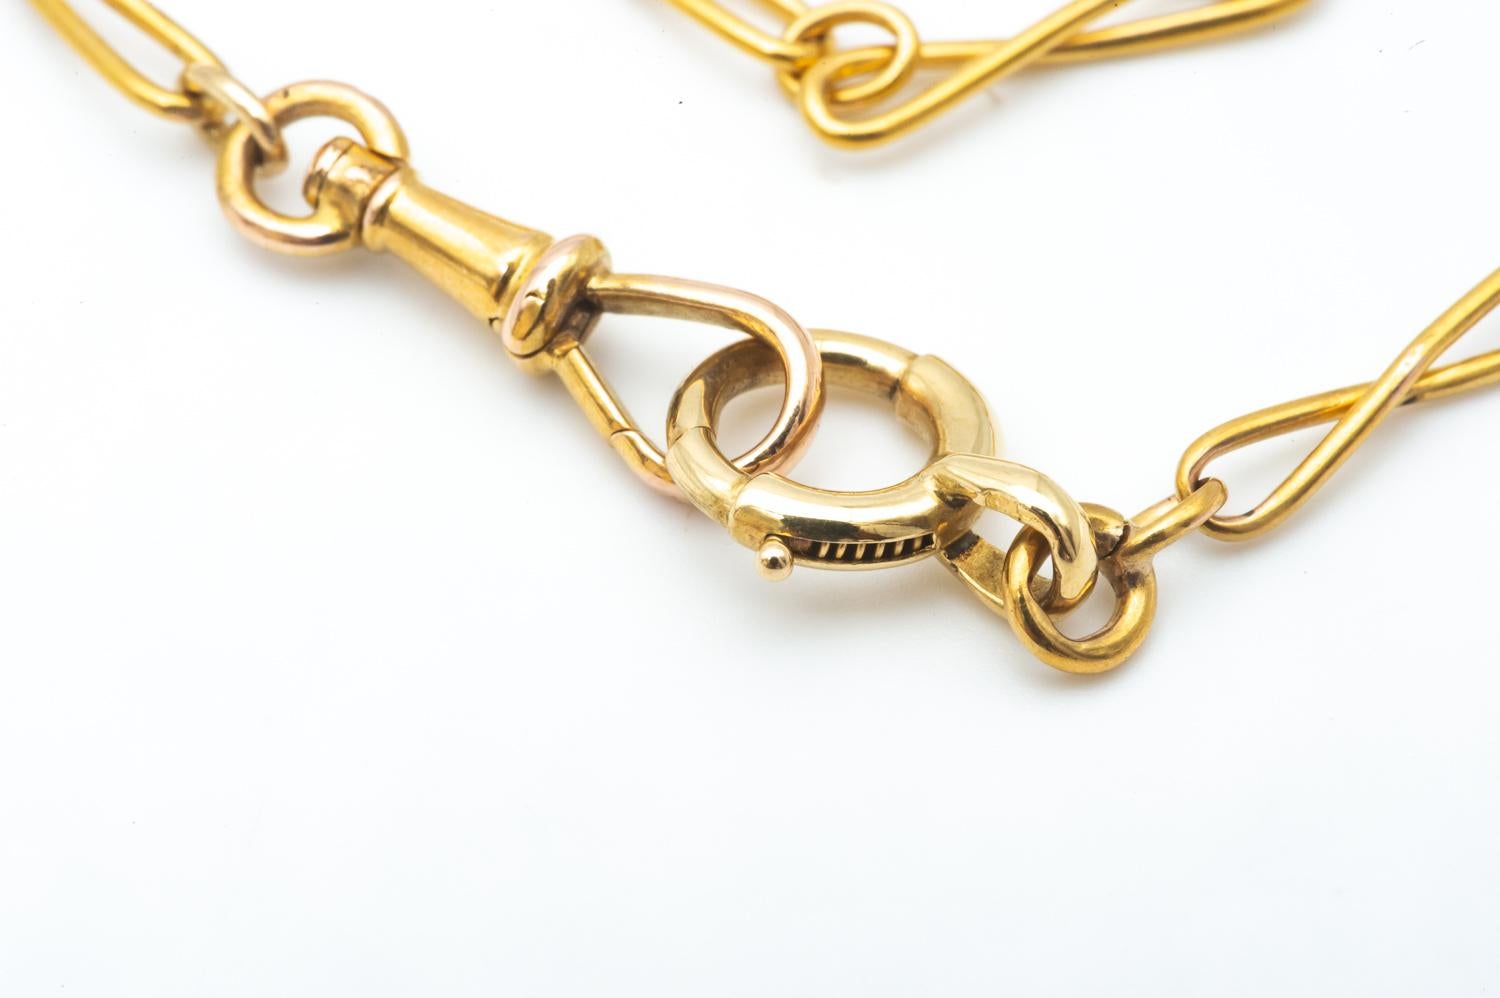 18k yellow gold gusset watch chain with links in the shape of 8

Chain that can be worn as a multi-row necklace and decorated with a pendant. 

Length : 127cm